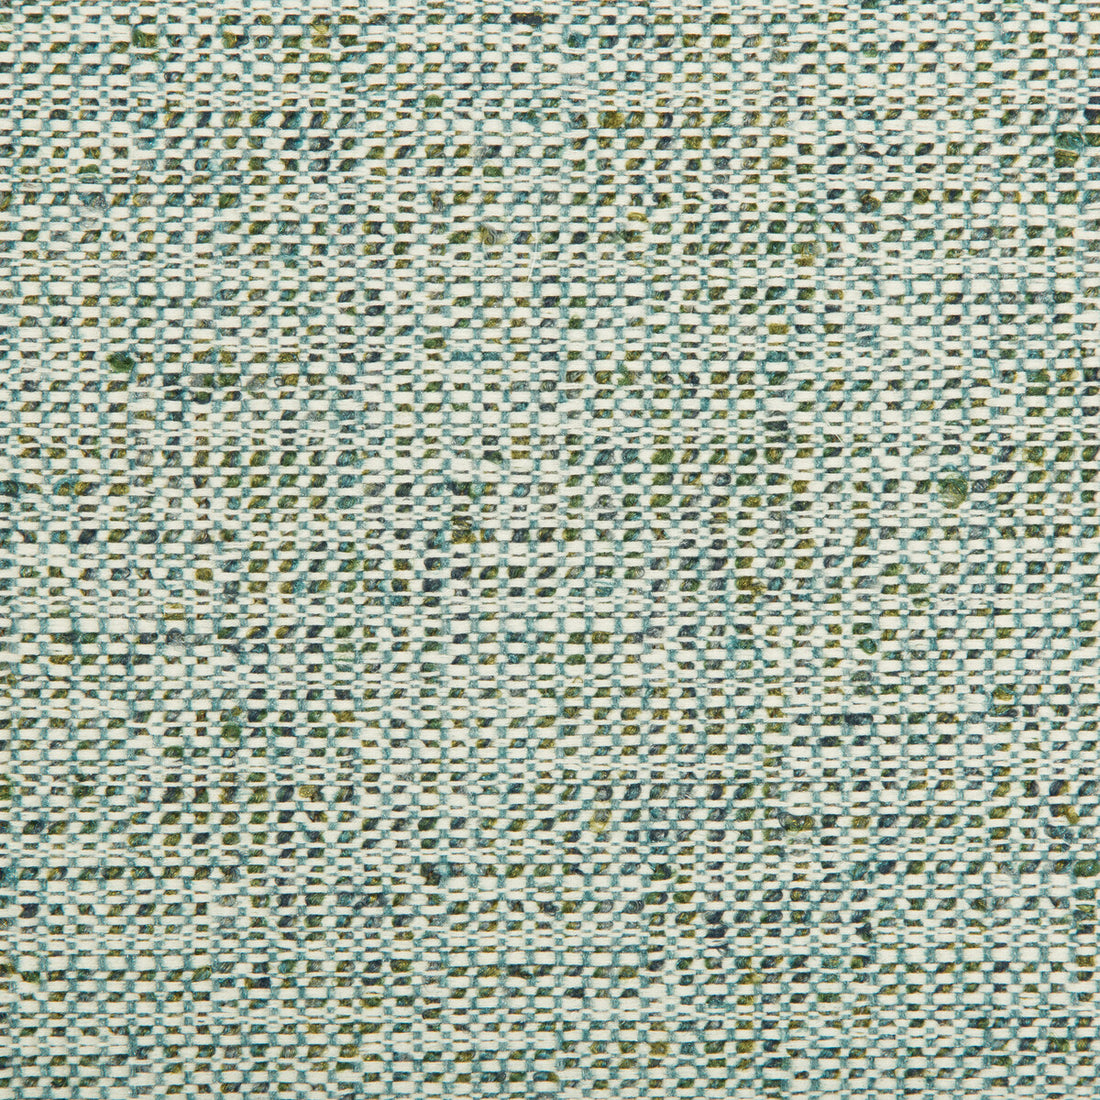 Kravet Contract fabric in 34635-135 color - pattern 34635.135.0 - by Kravet Contract in the Crypton Incase collection